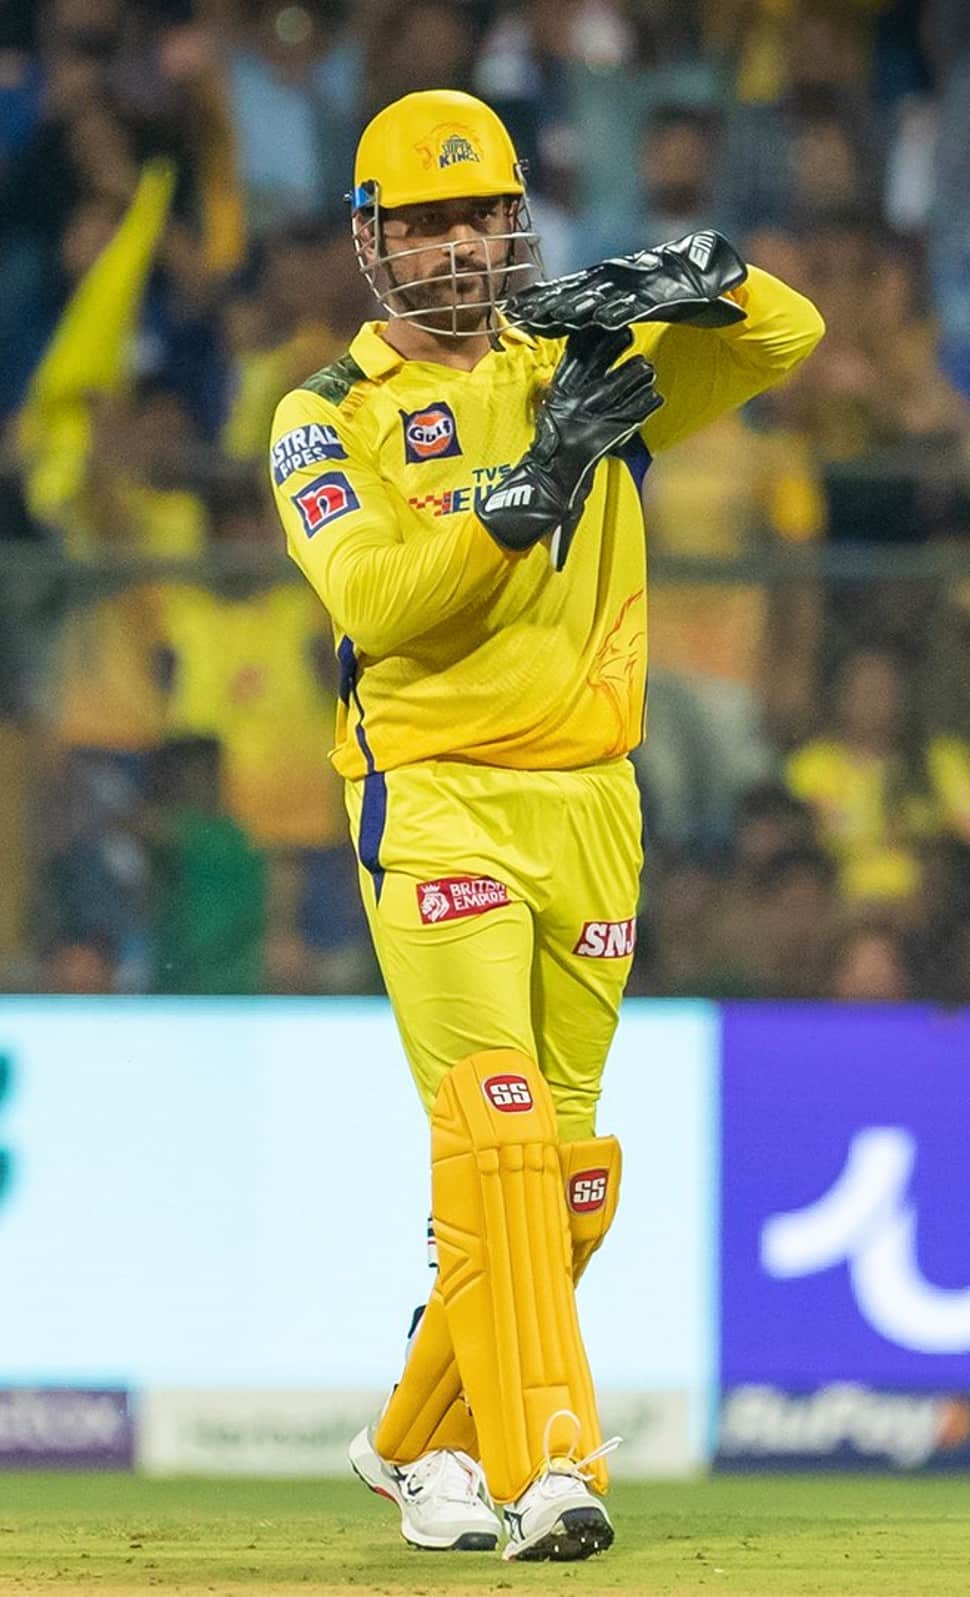 Ultimate Collection of Amazing CSK MS Dhoni Images in Full 4K Quality